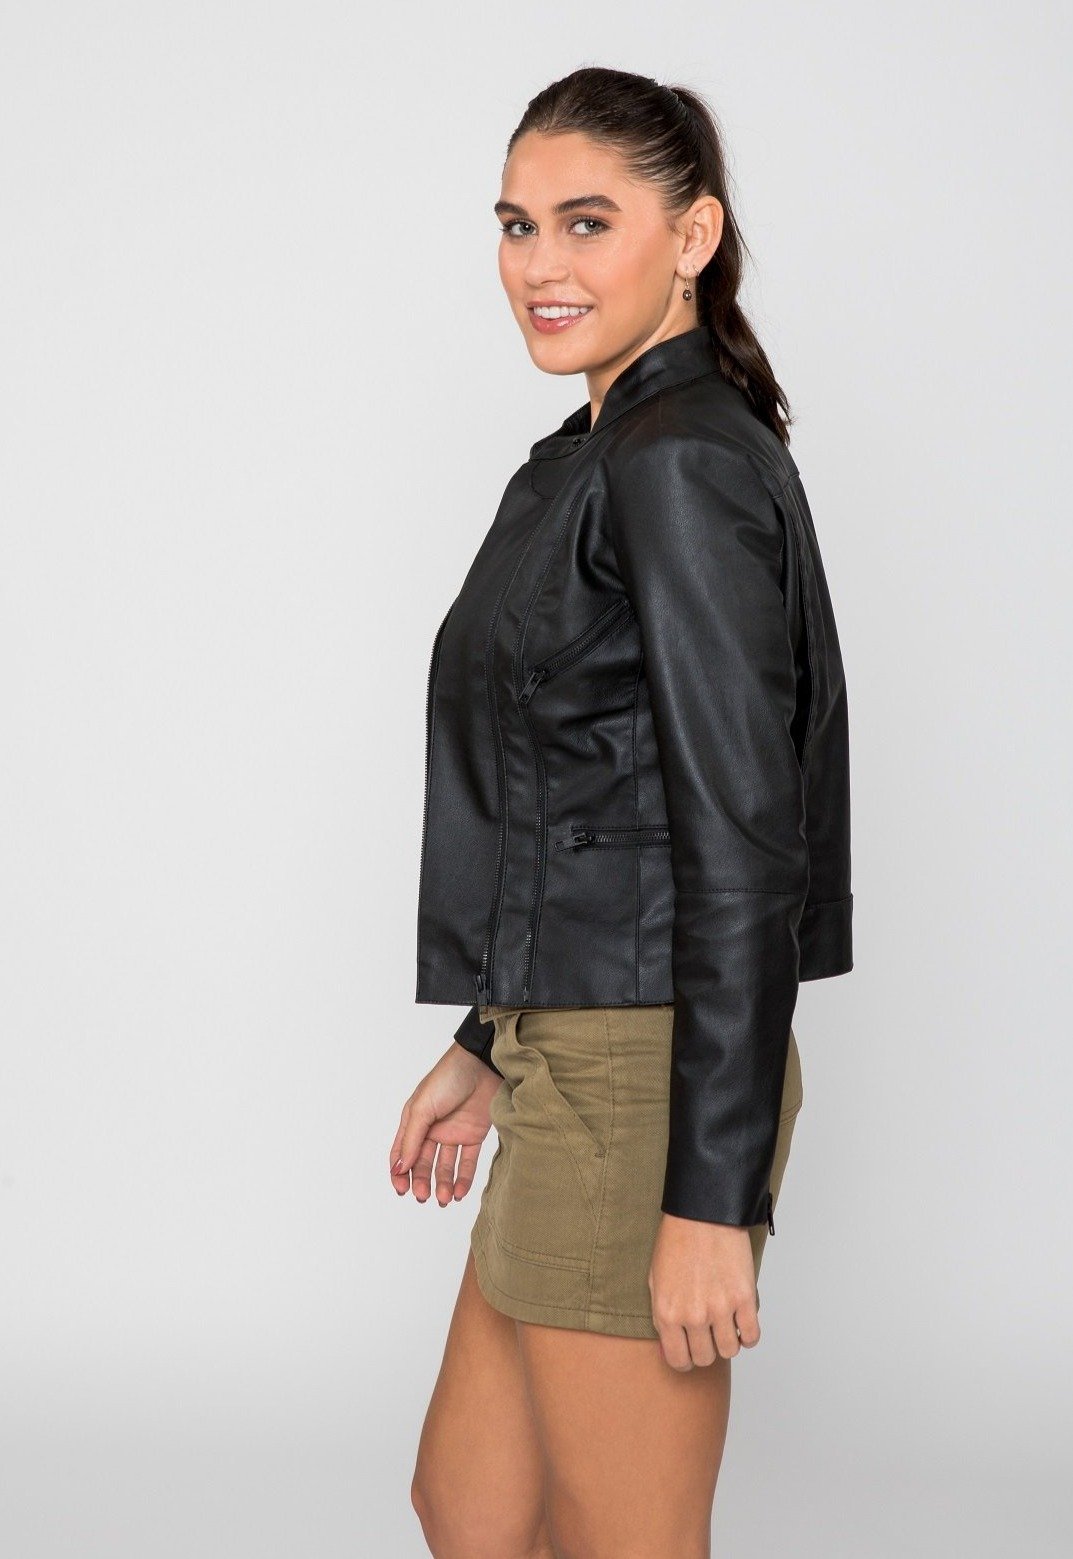 Picture of a Women's Soft Faux Black Leather Jacket side view